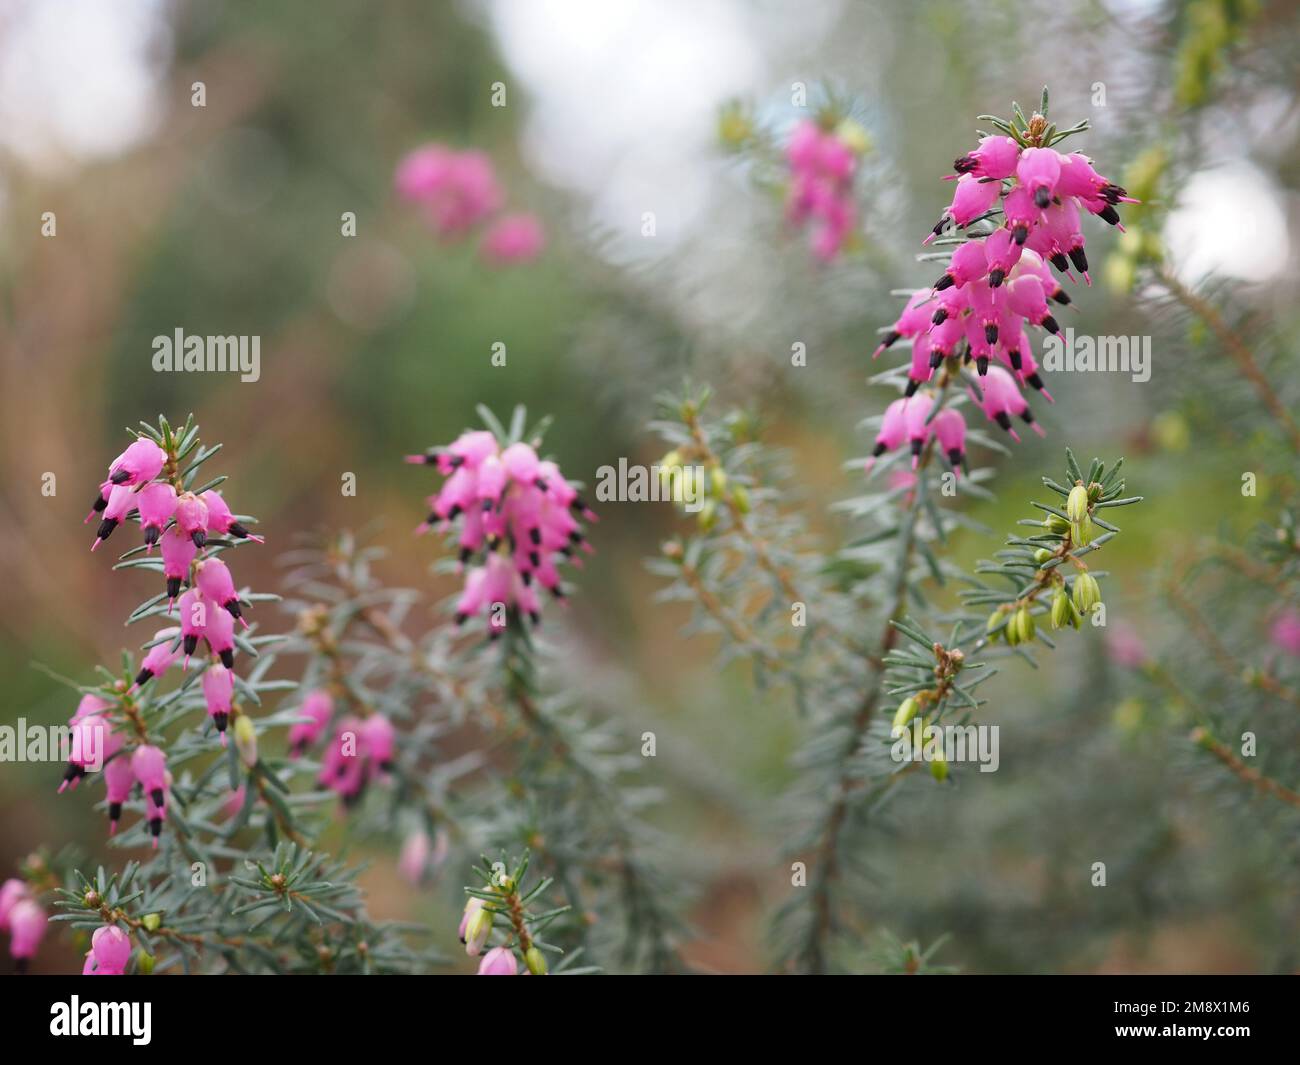 Close up of bright pink Erica carnea (Winter Heath) flowers against a blurred background Stock Photo